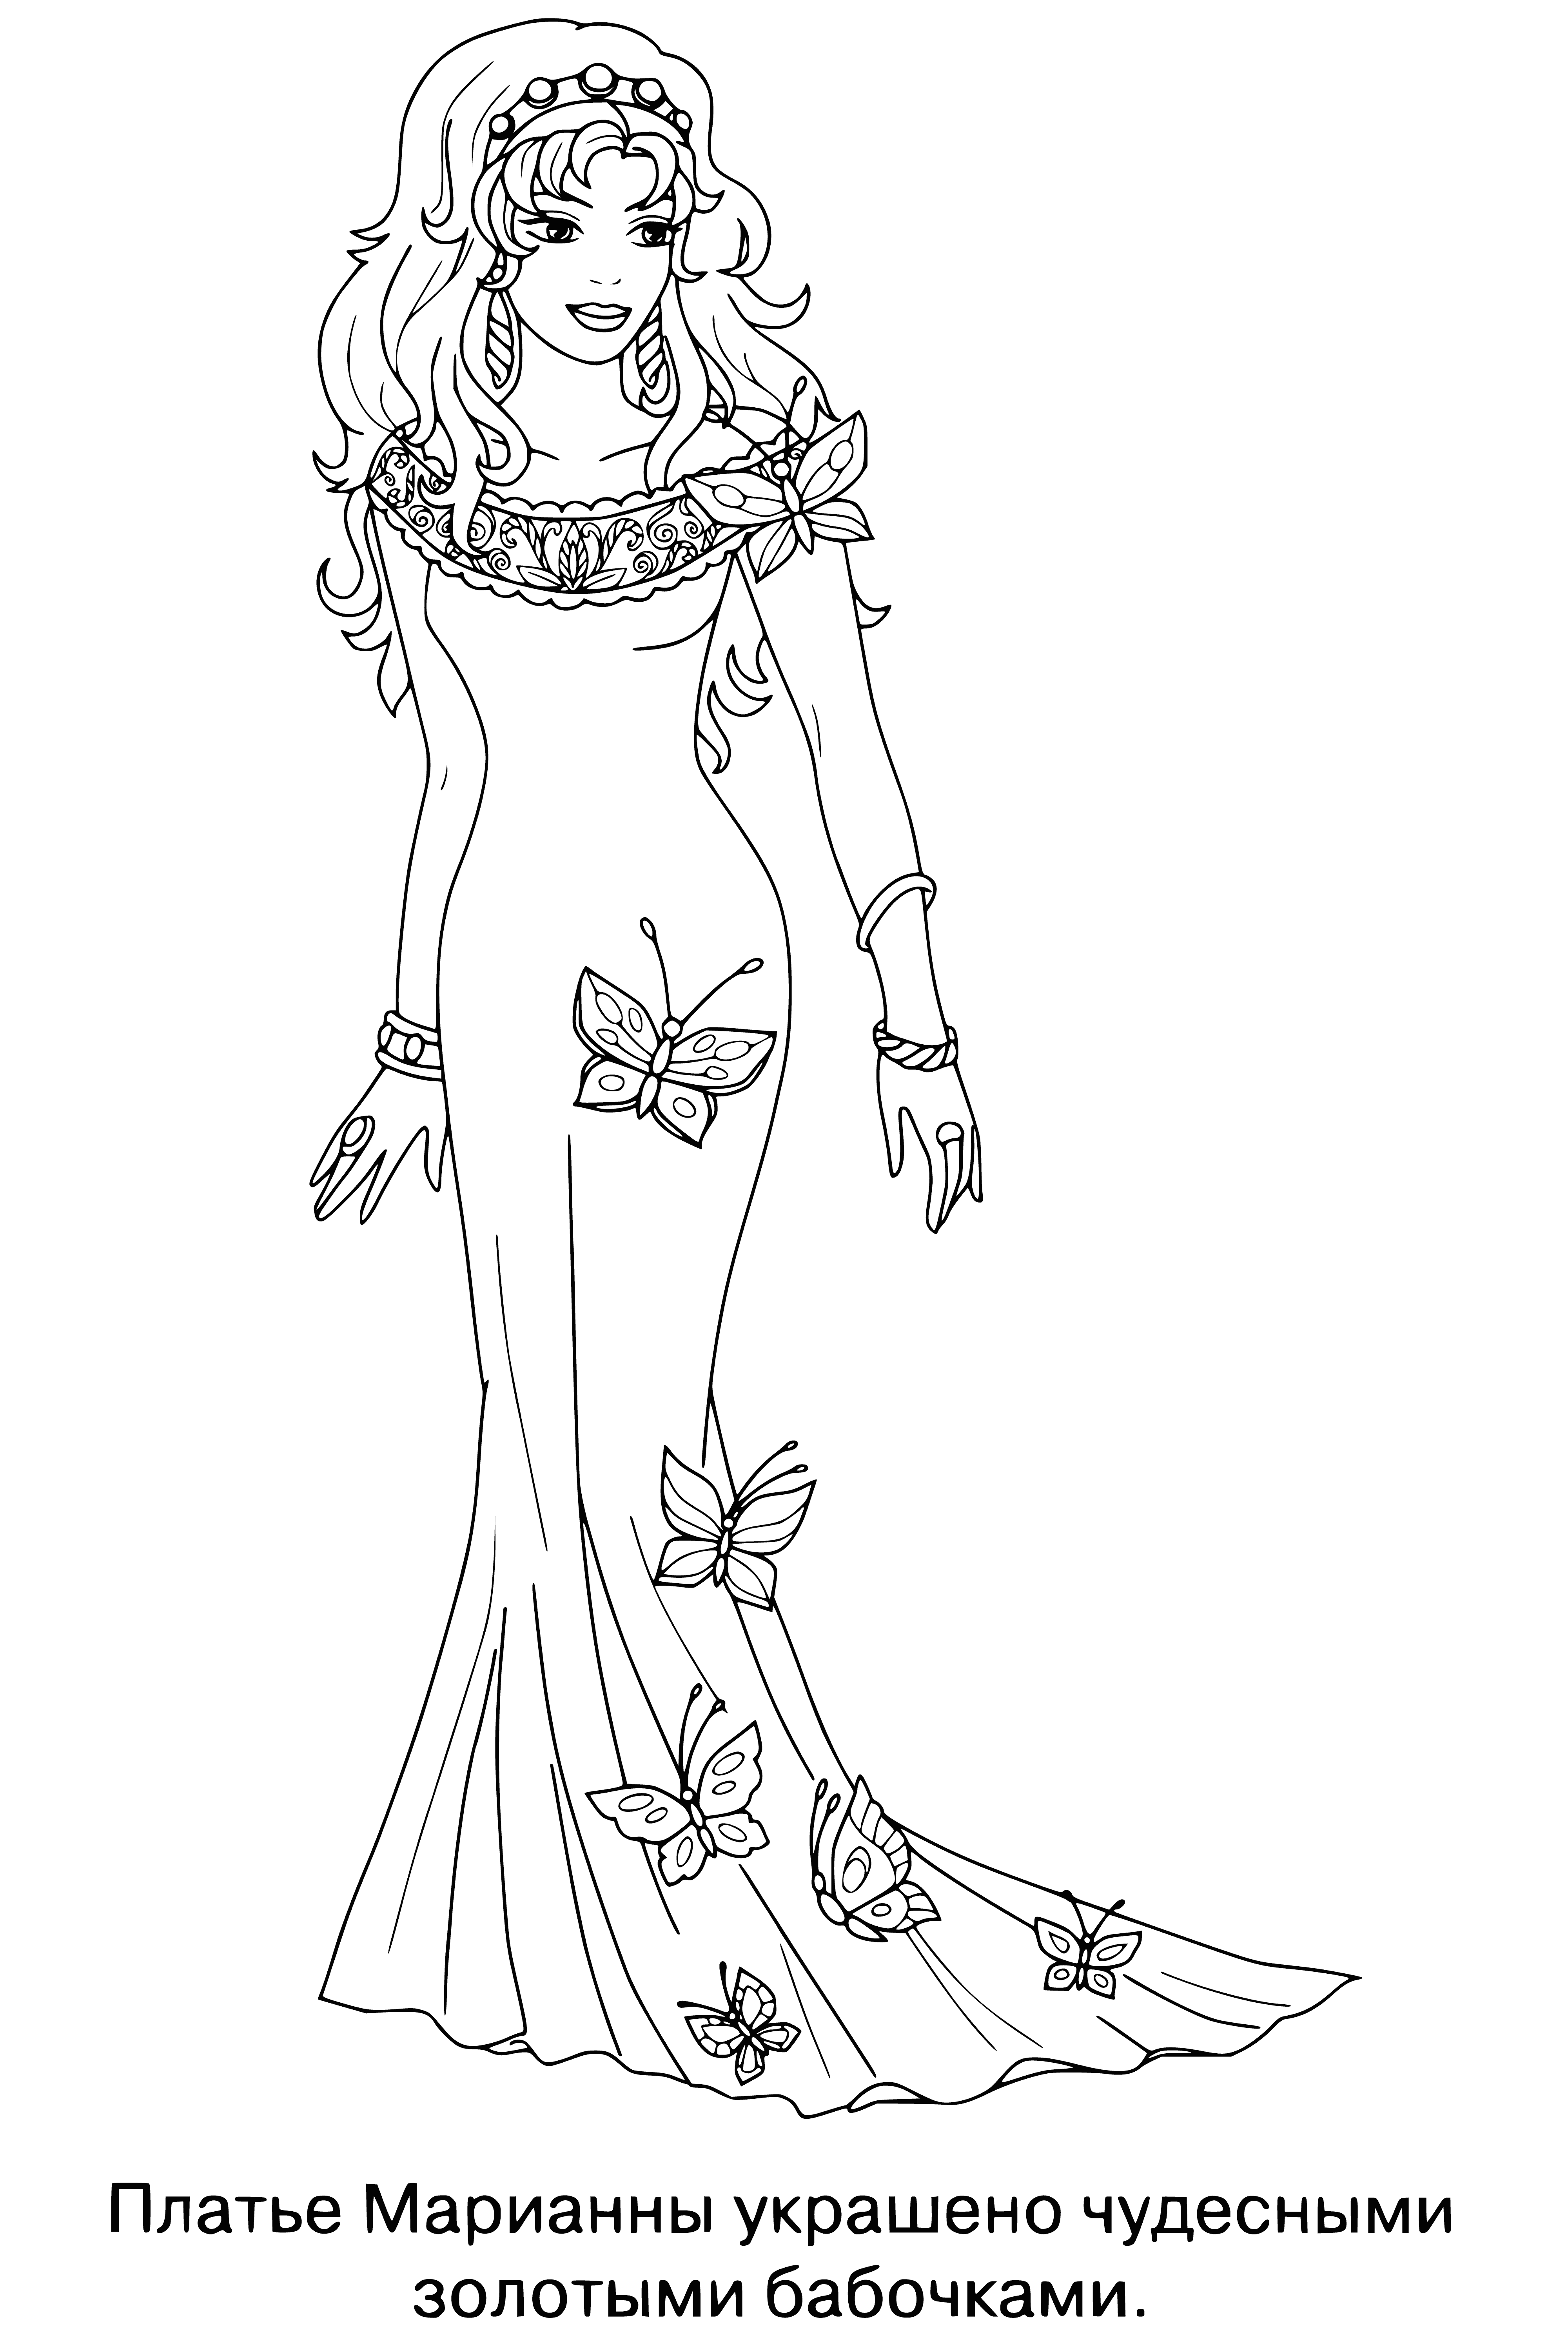 coloring page: Little girl, crown & scepter in-hand, waits atop throne in pink princess gown.